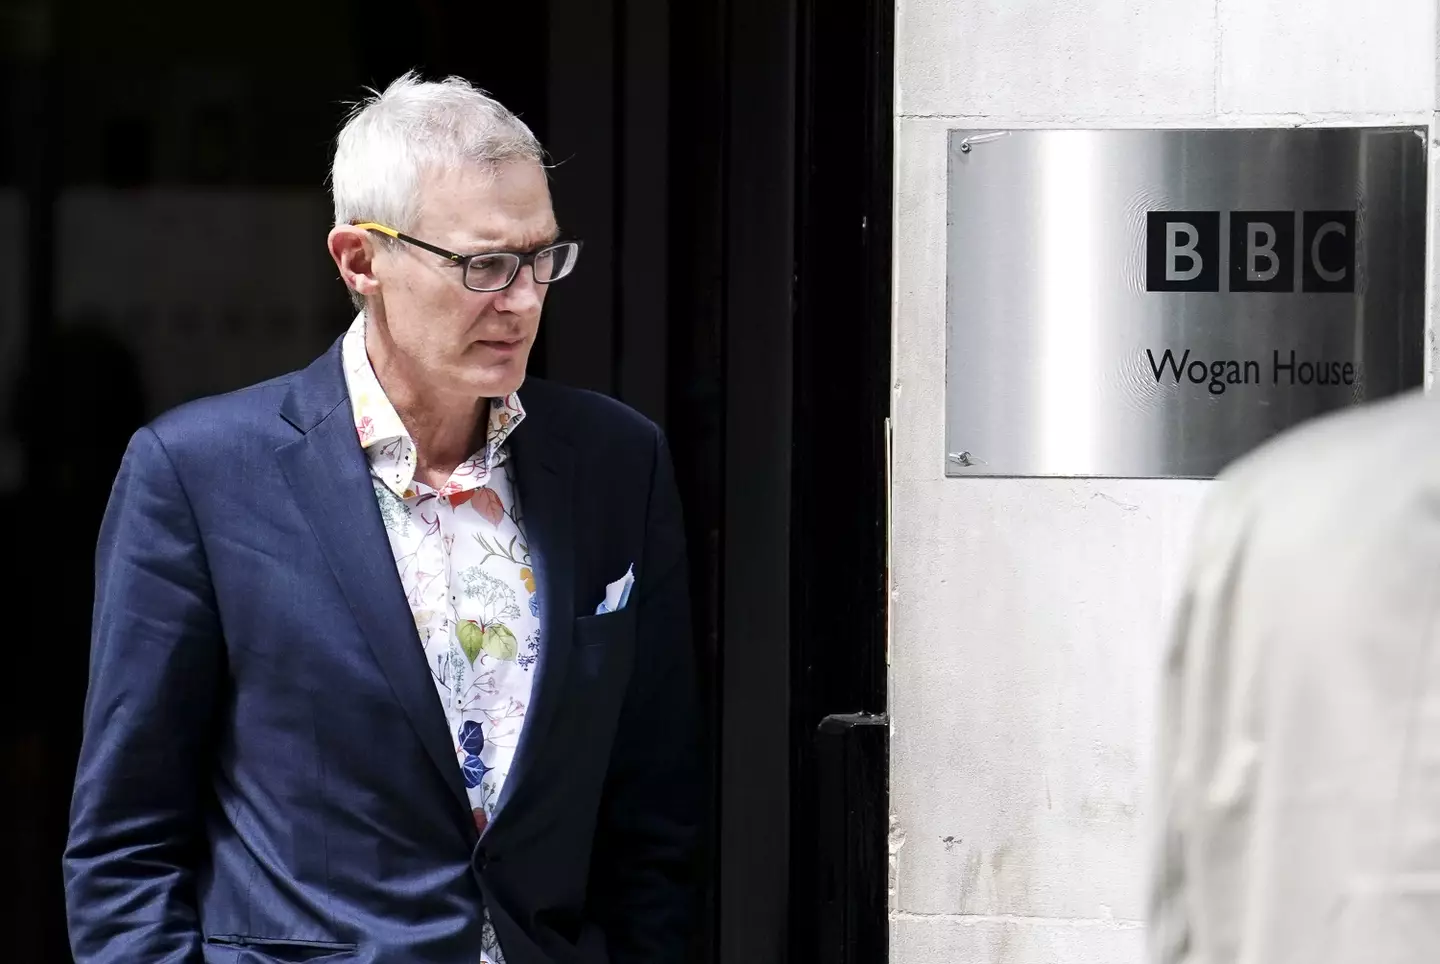 Jeremy Vine announced that a Twitter user who falsely identified him has apologised and paid money to charity.